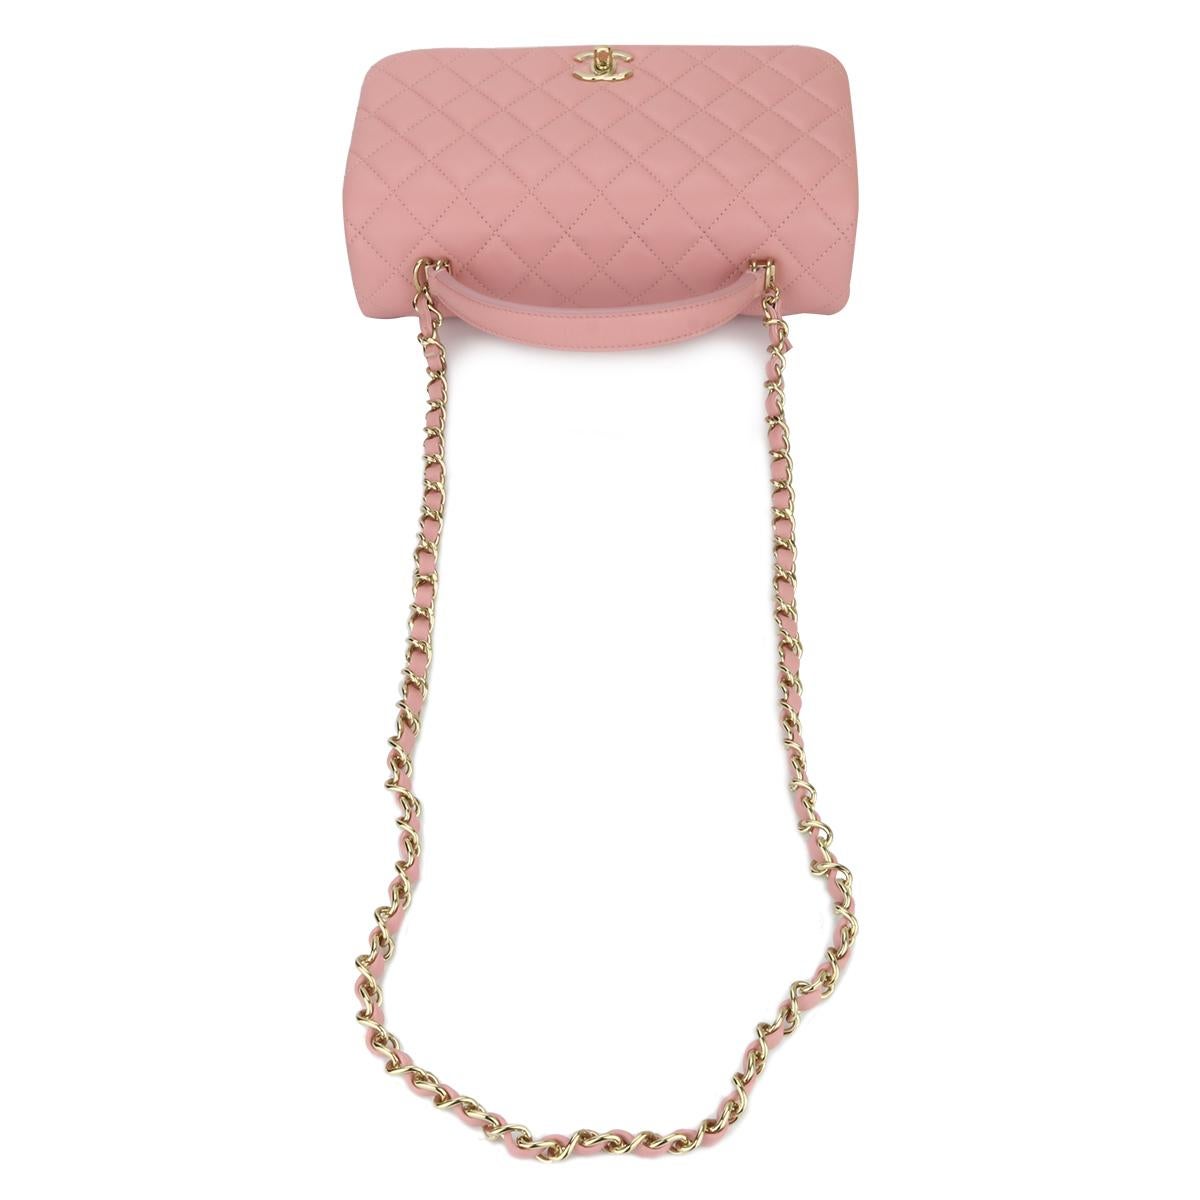 CHANEL Citizen Chic Medium Flap Bag Pink Lambskin with Gold Hardware 2018 2